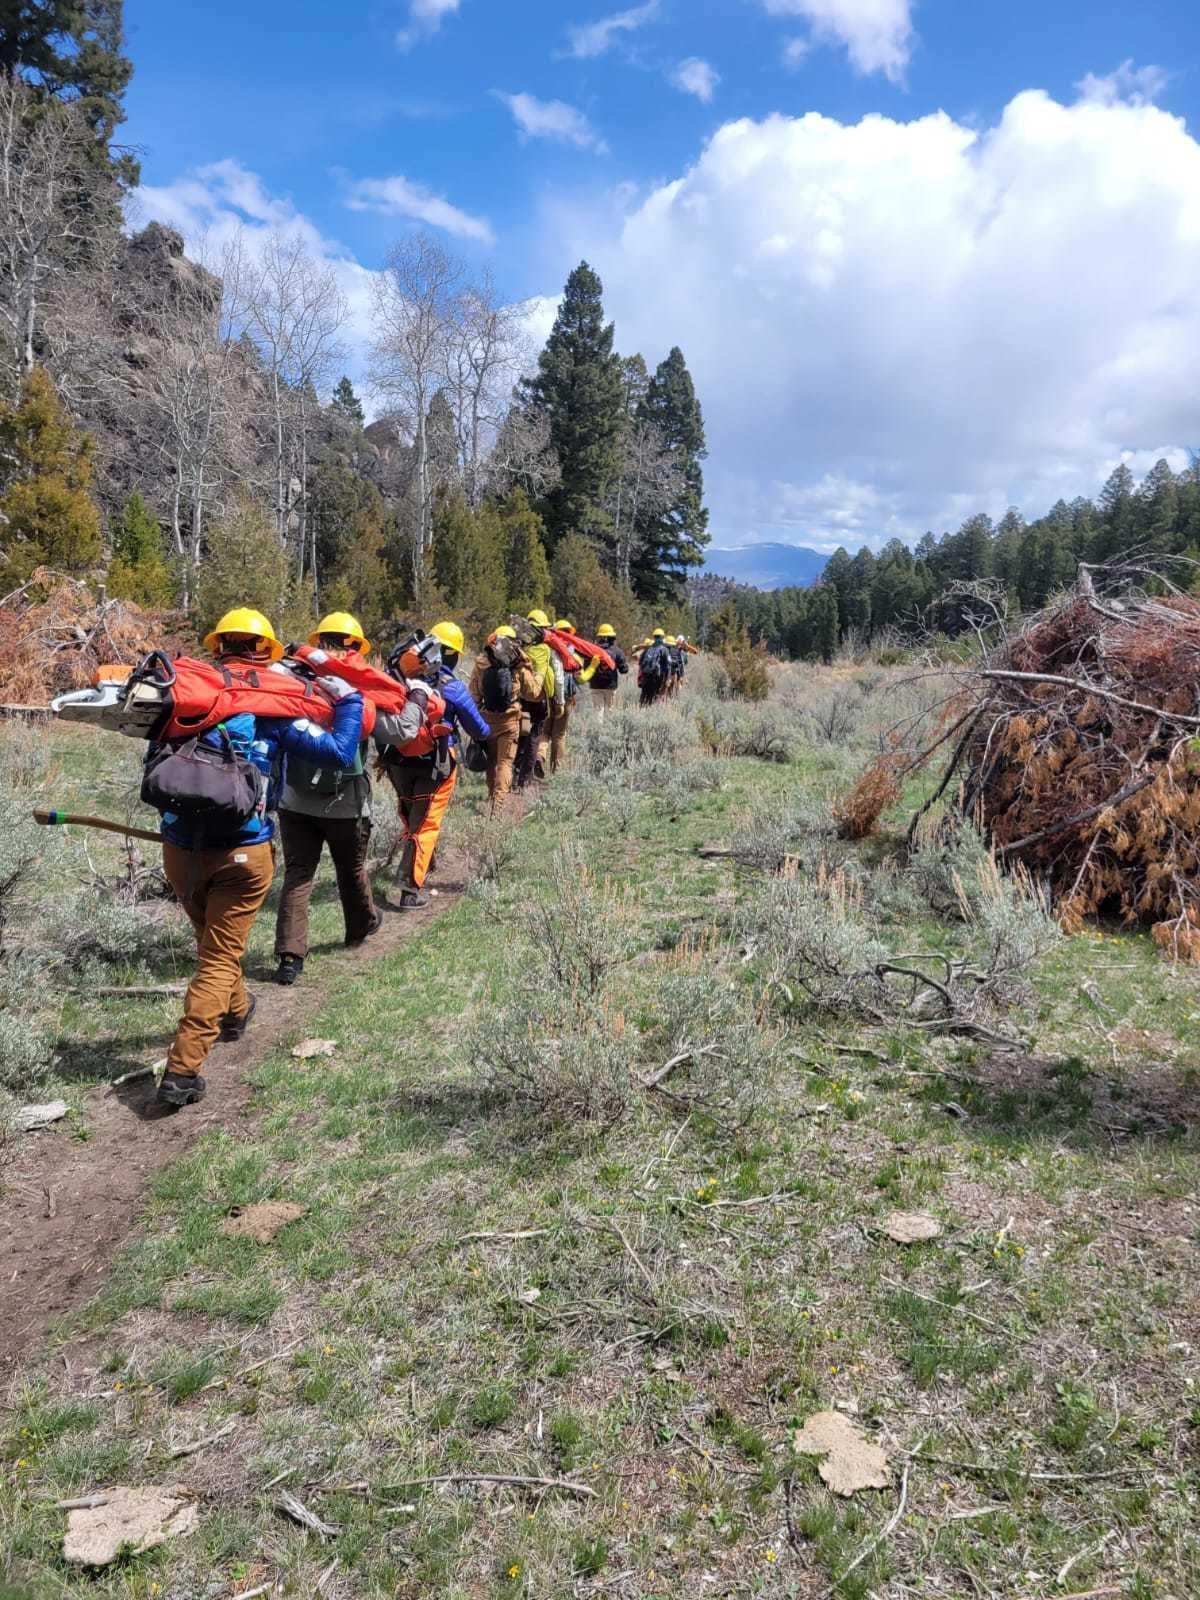 The women's fire crew, each carrying chainsaws on their shoulders, marches in a line away from the camera